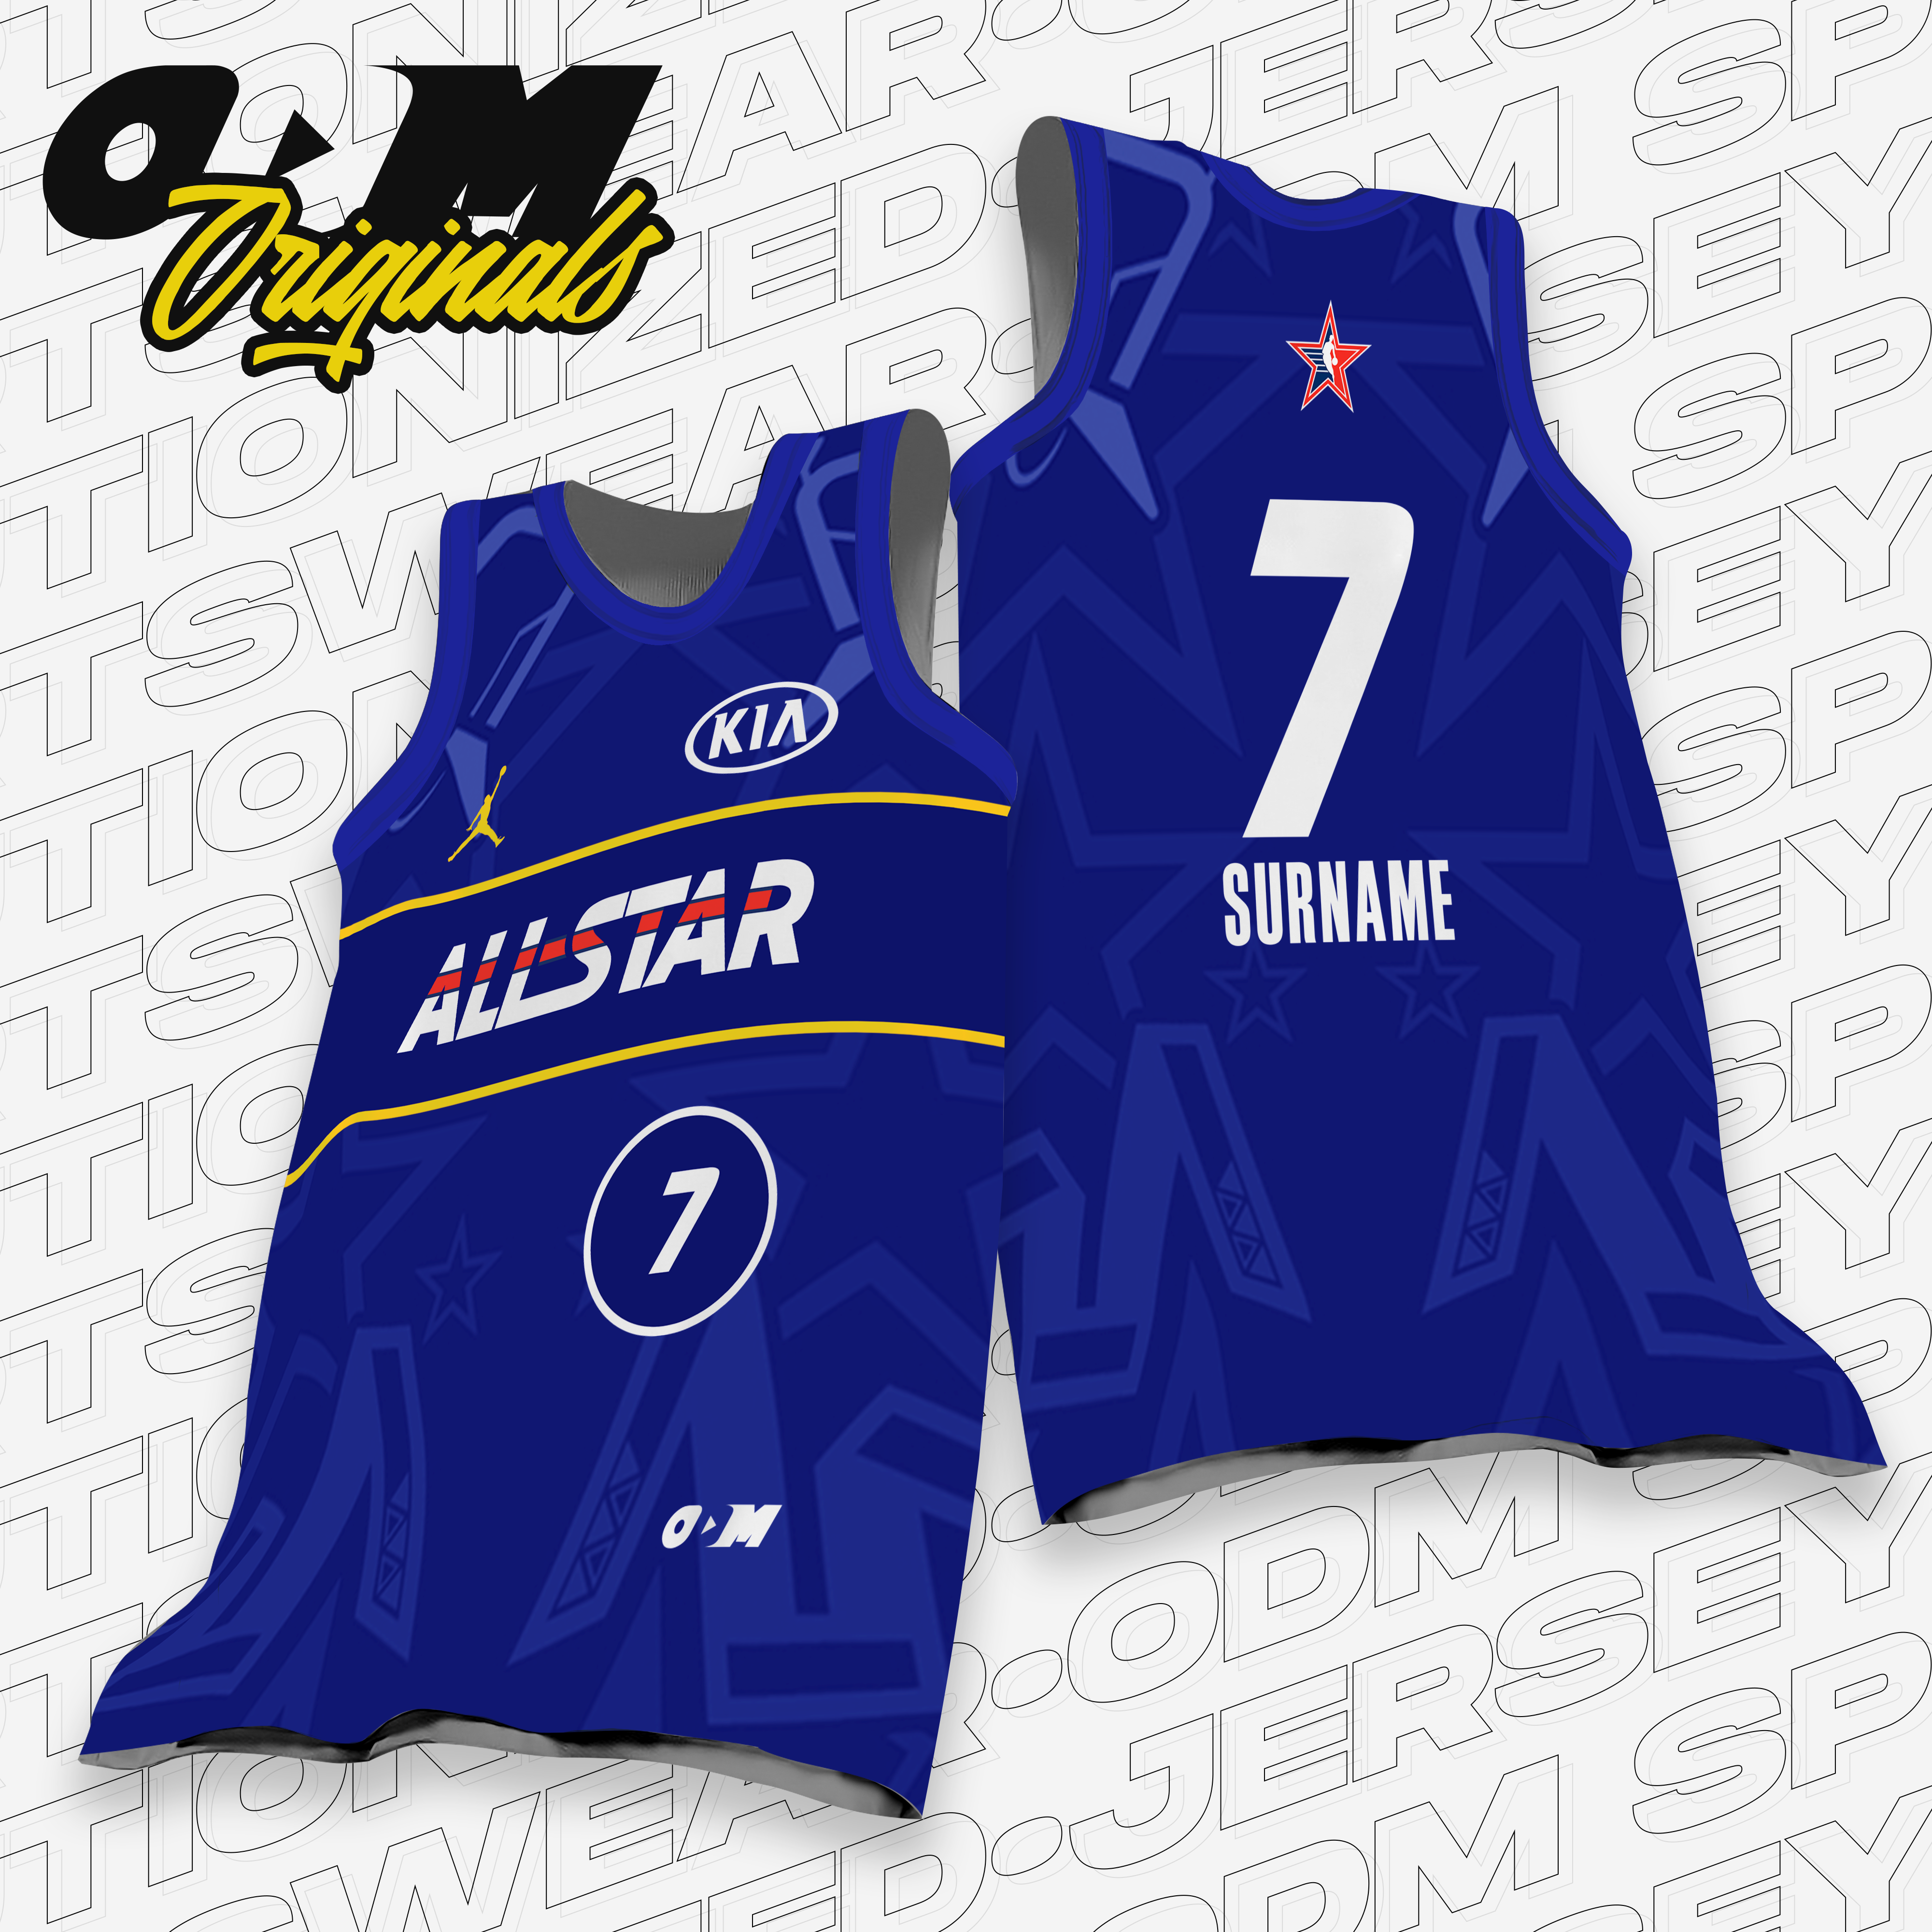 Devin Booker - Team Durant - Game-Issued 2021 NBA All-Star Jersey